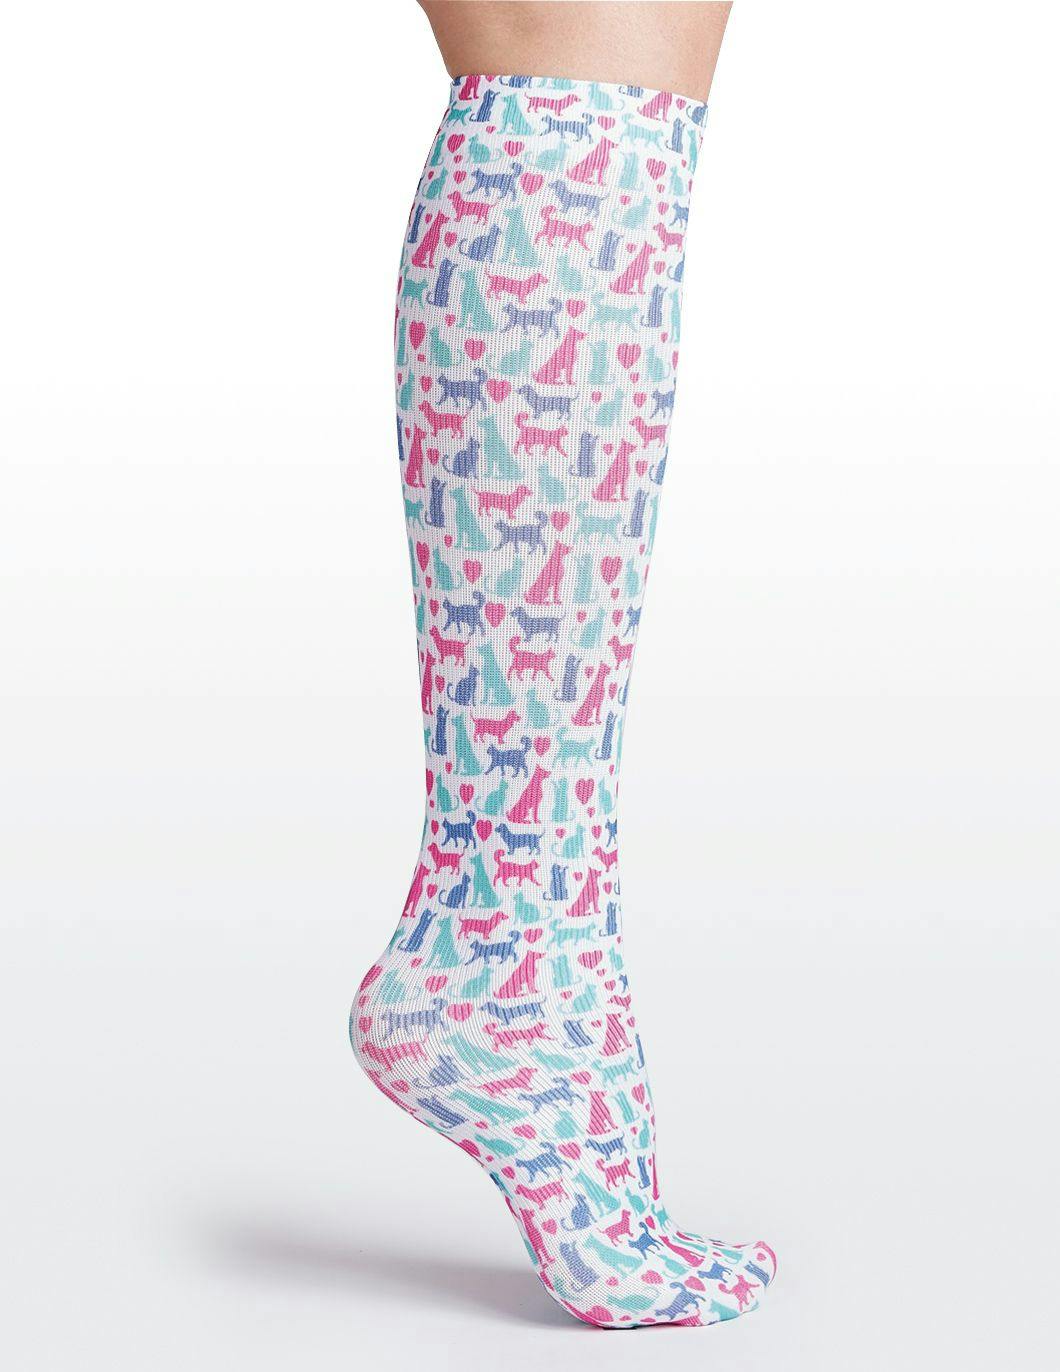 cutieful-compression-socks-bright-cats-and-dogs-print